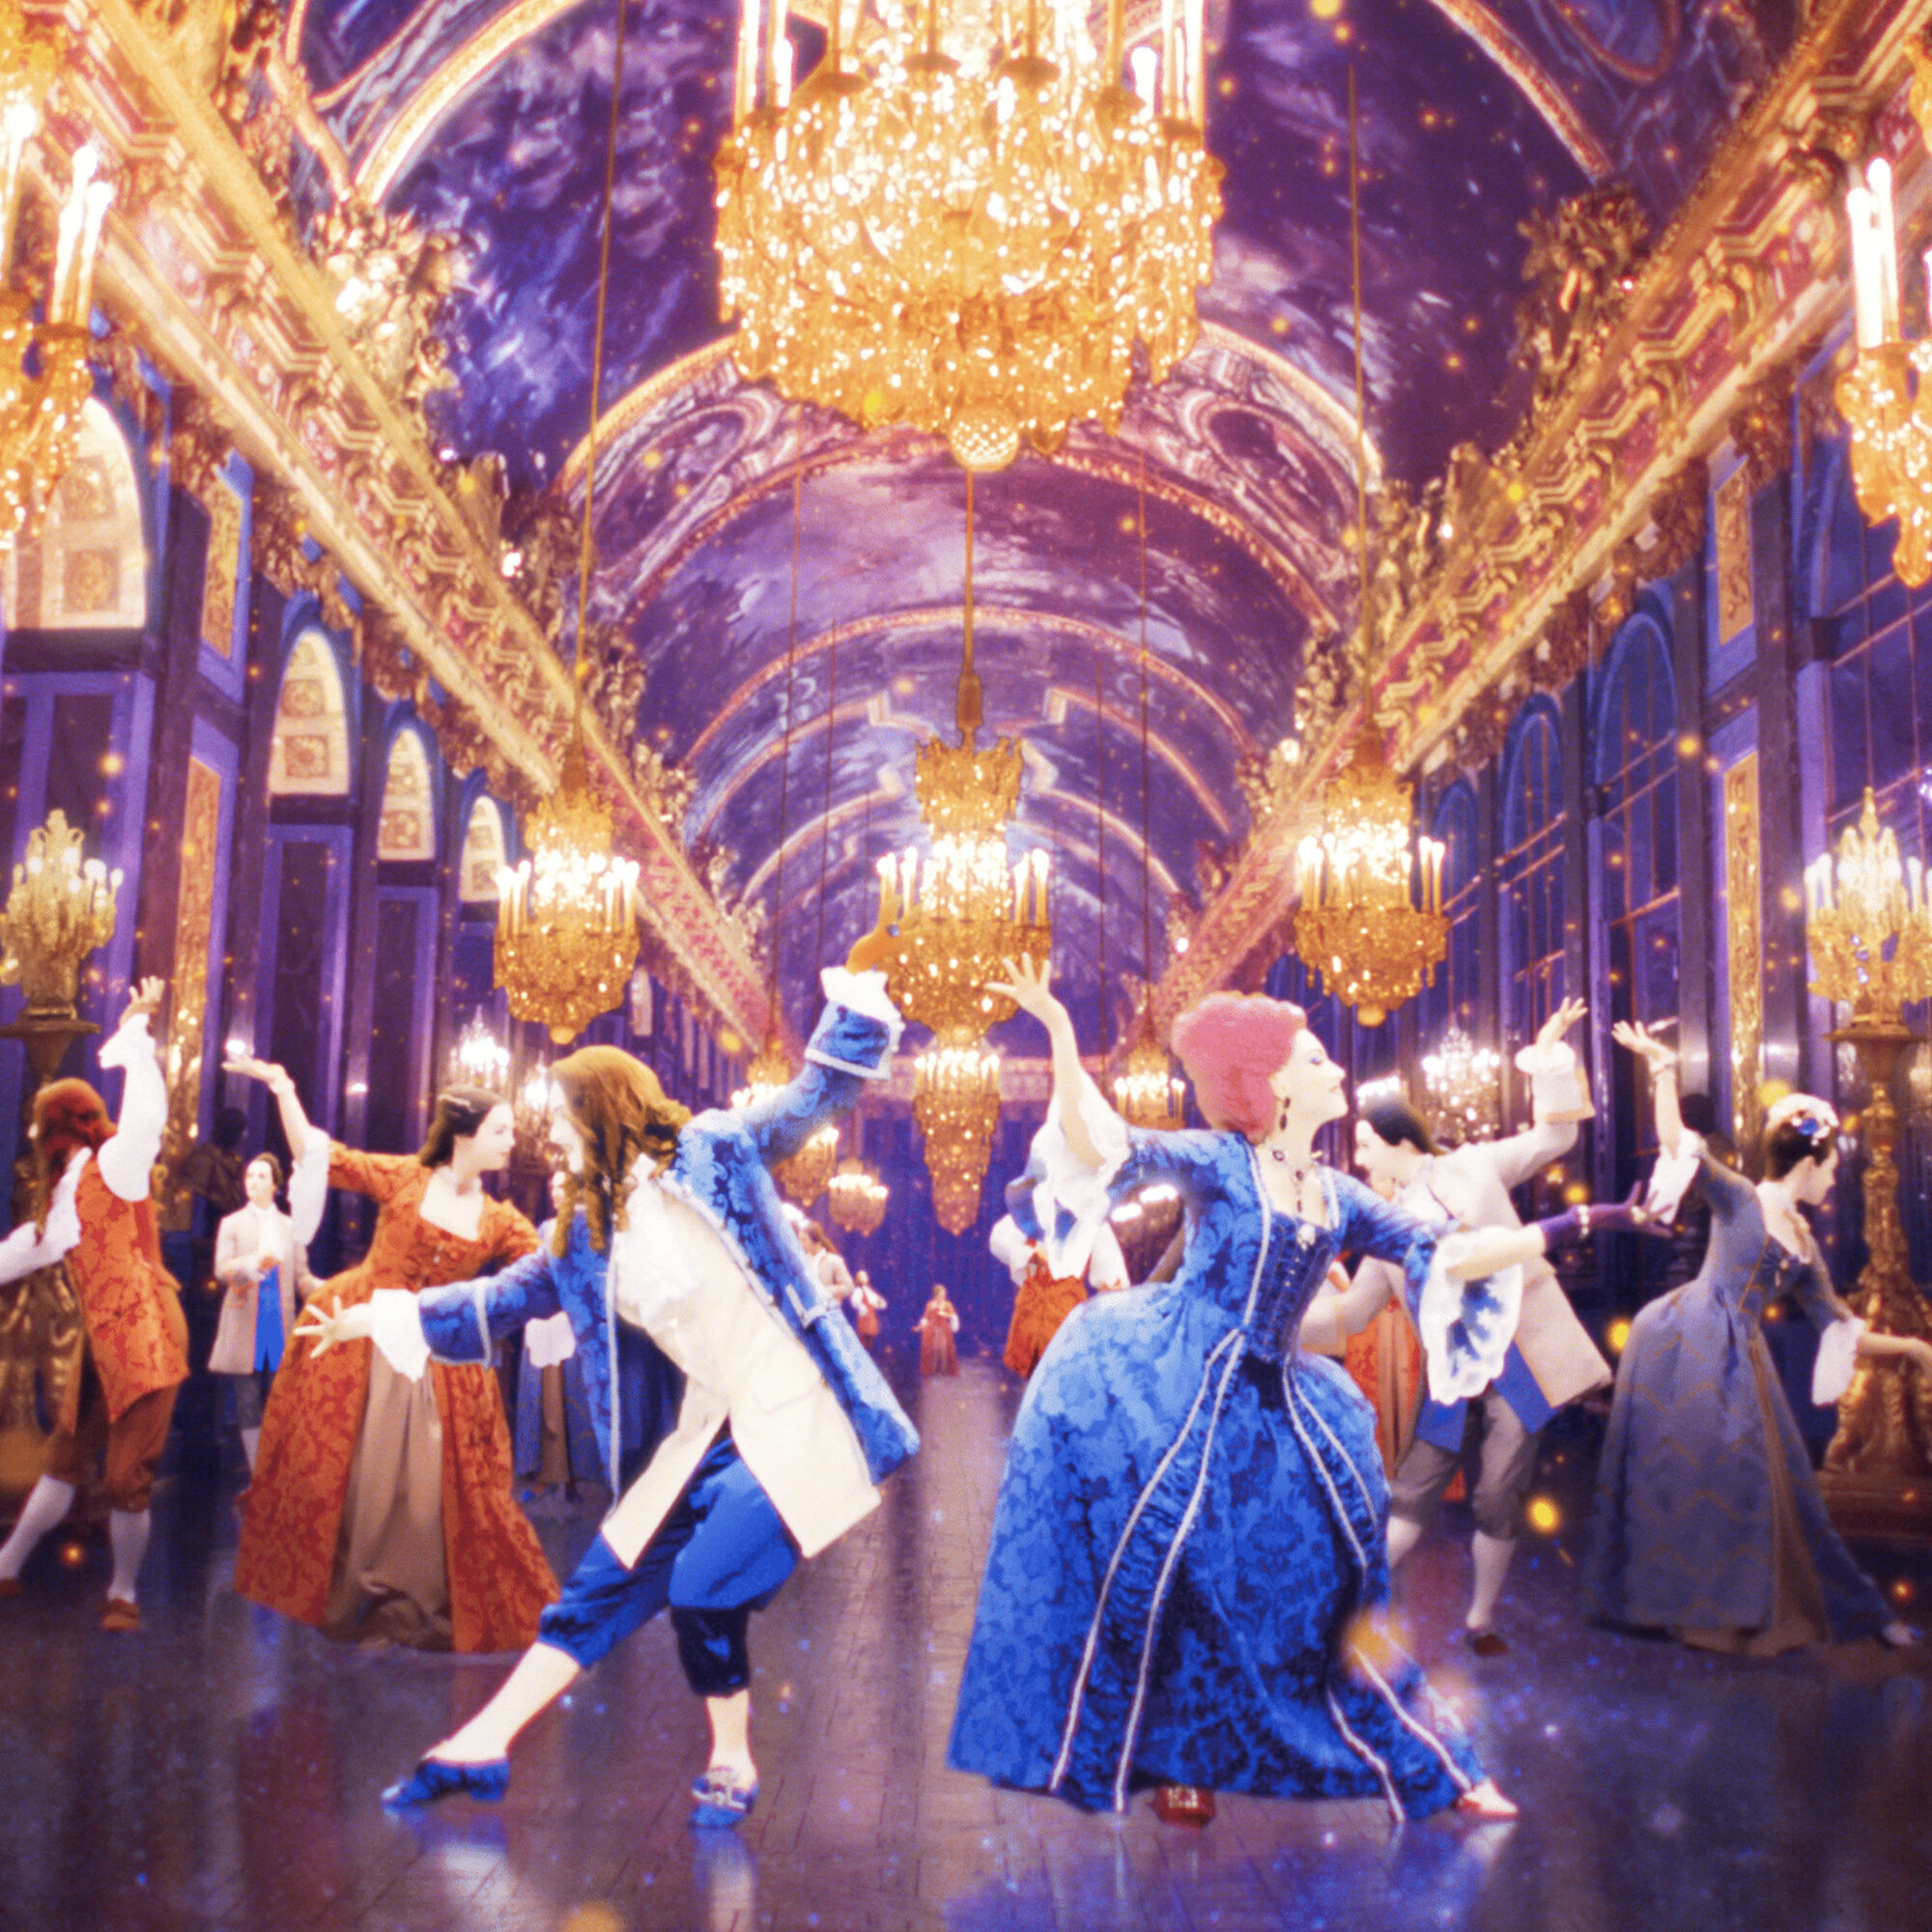 Just Dance a night in the chateau de versailles